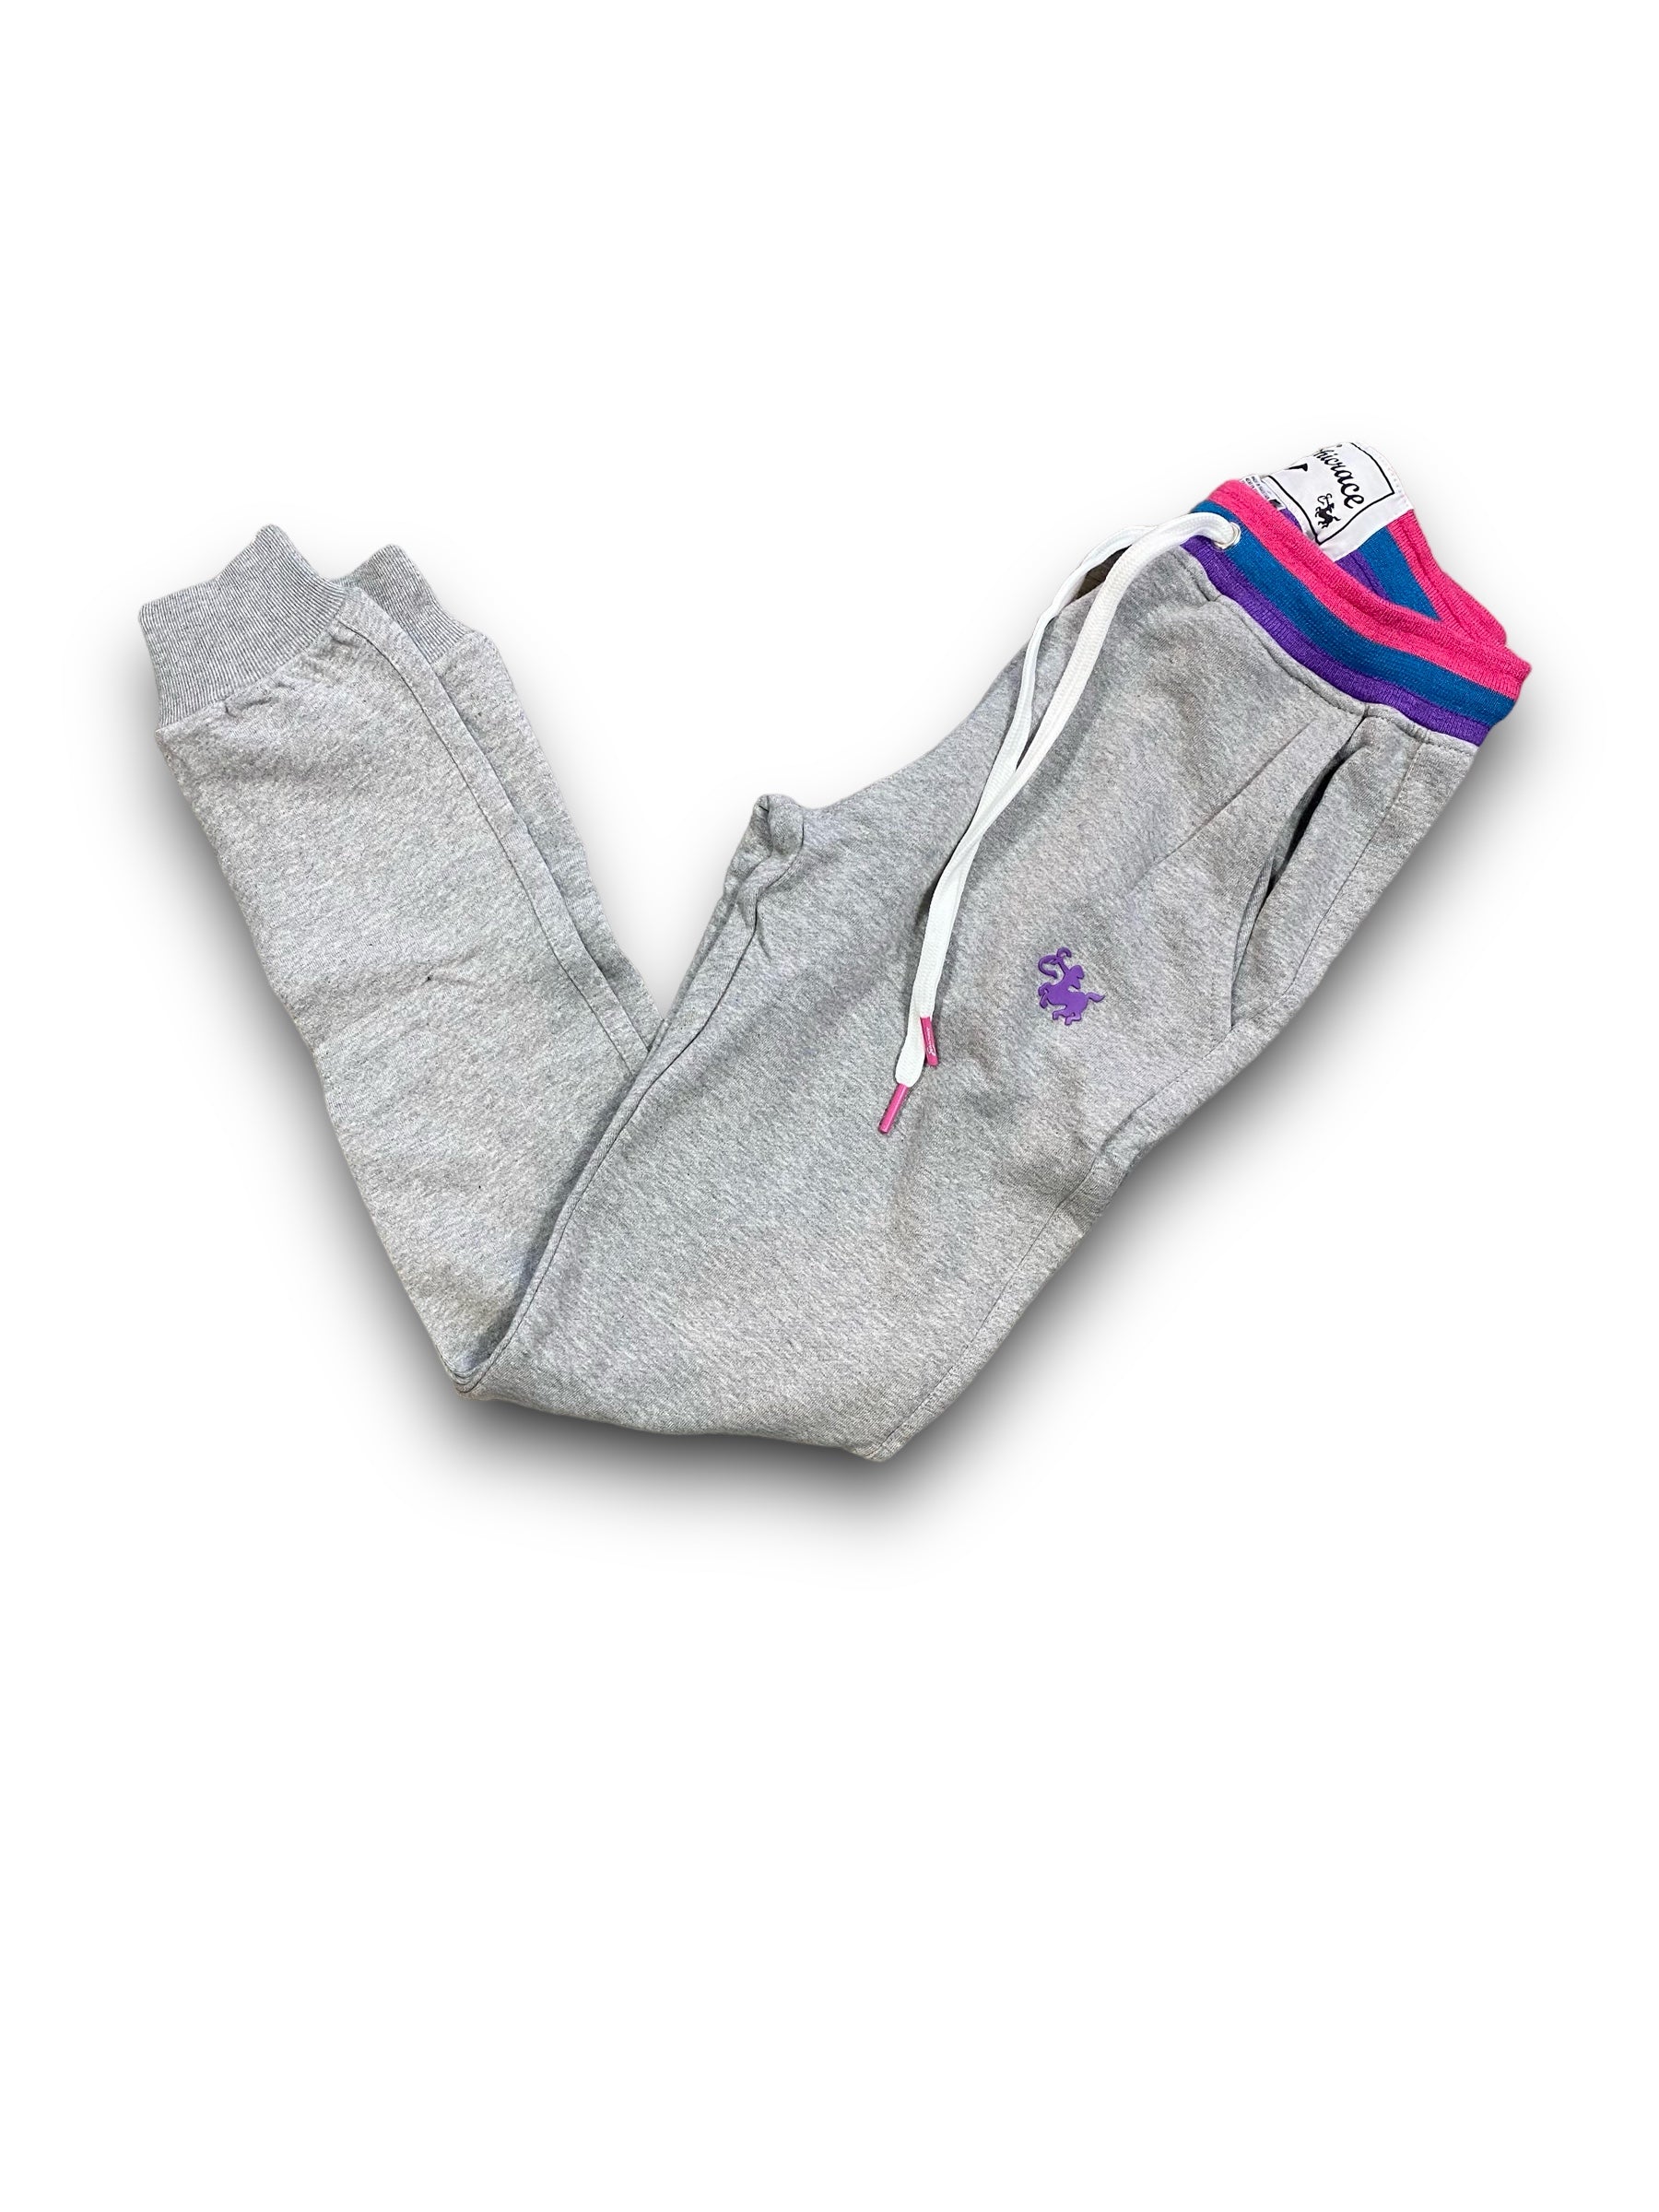 Womens Ethicrace Signature Embrodiery Hoody Grey/Pink/Purple